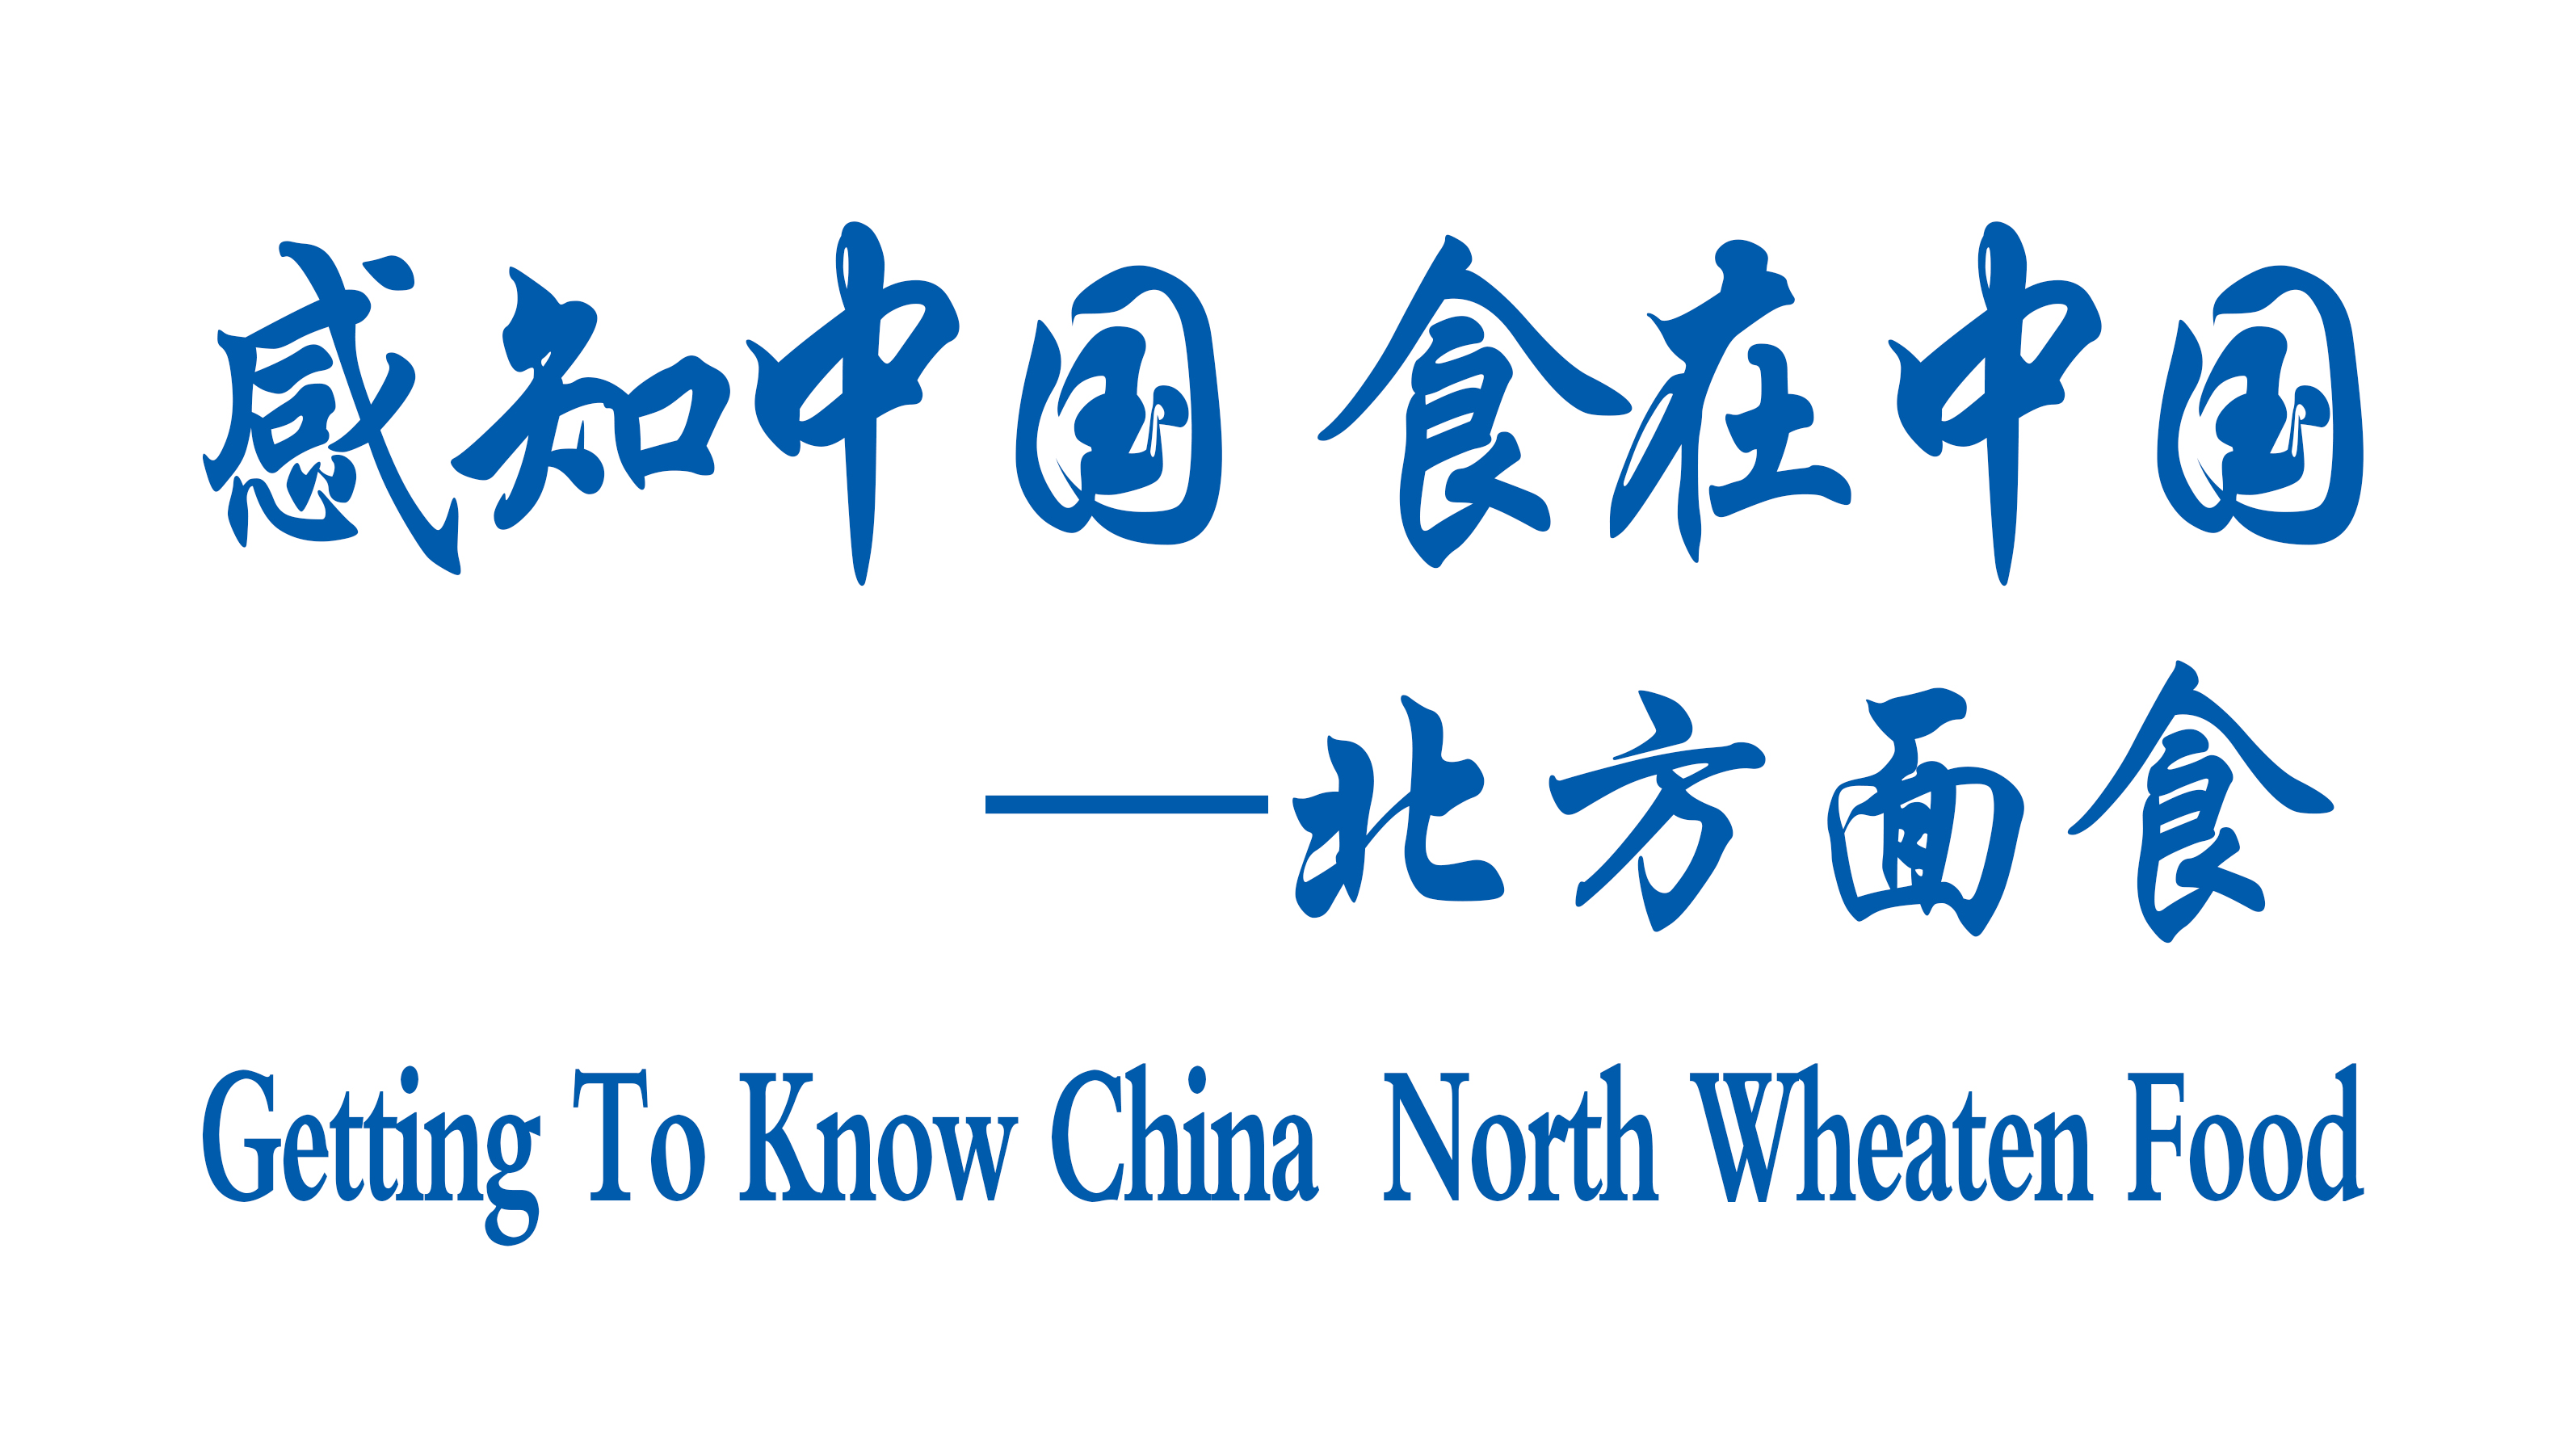 Getting To Know China — North Wheaten Food